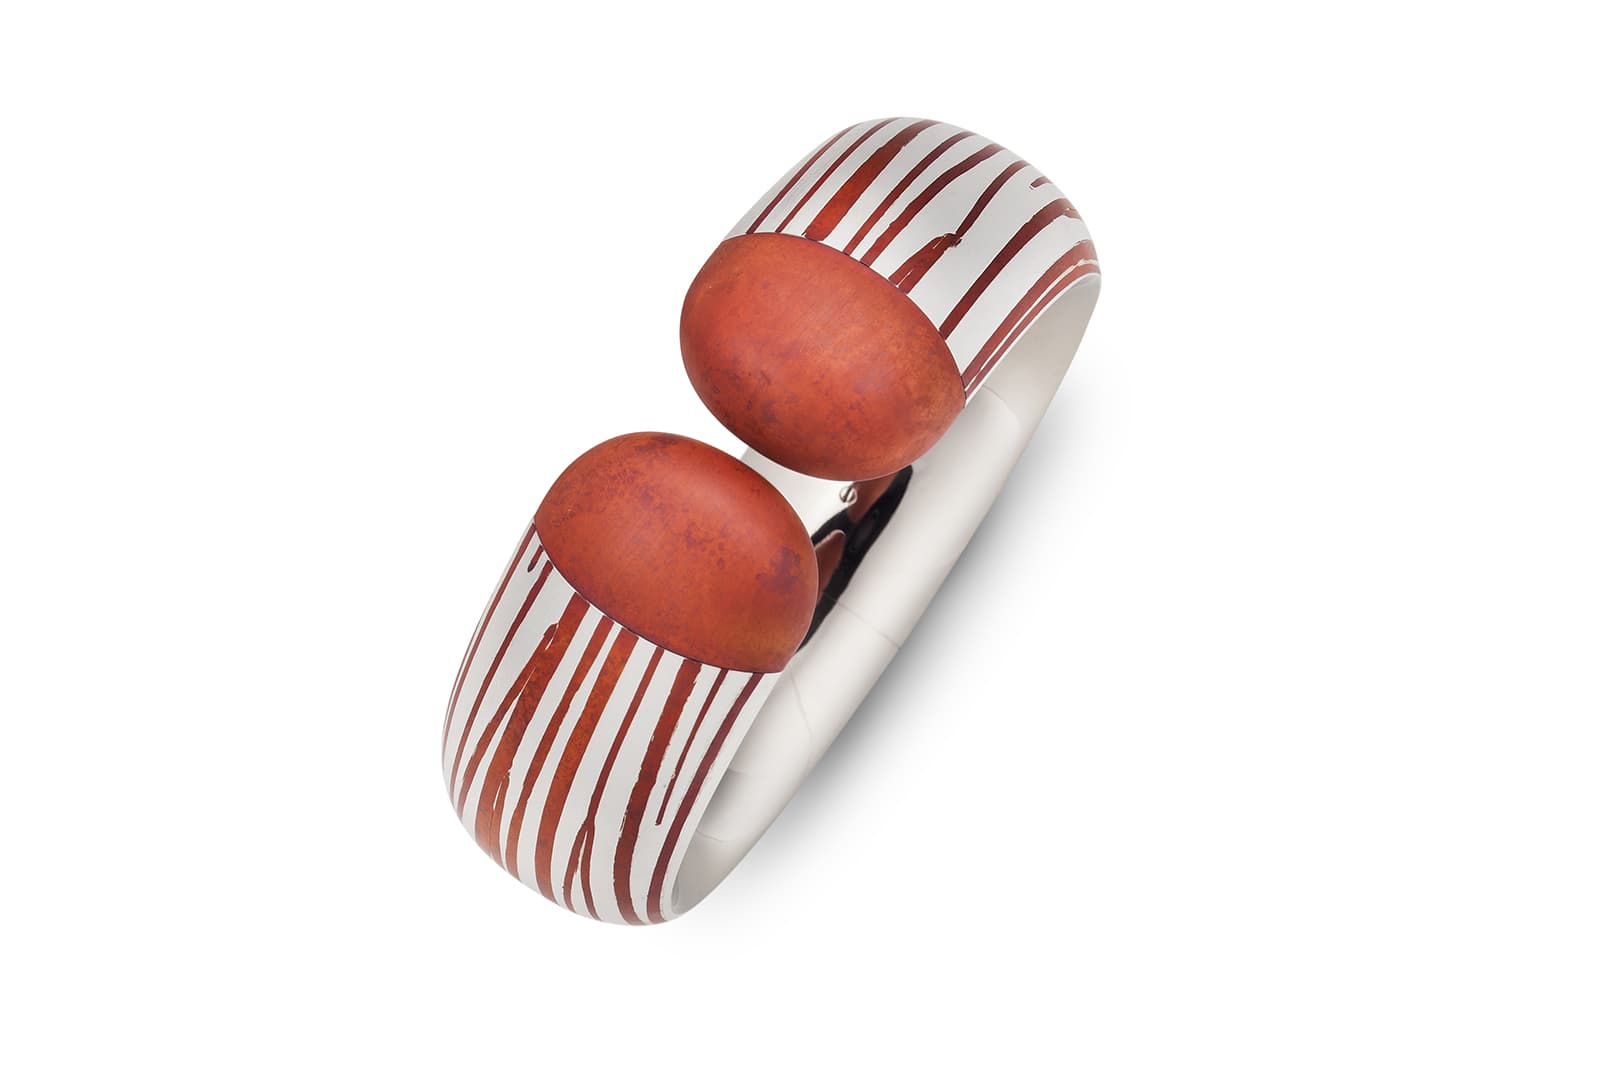 Hemmerle Harmony bangle in silver, copper and white gold 